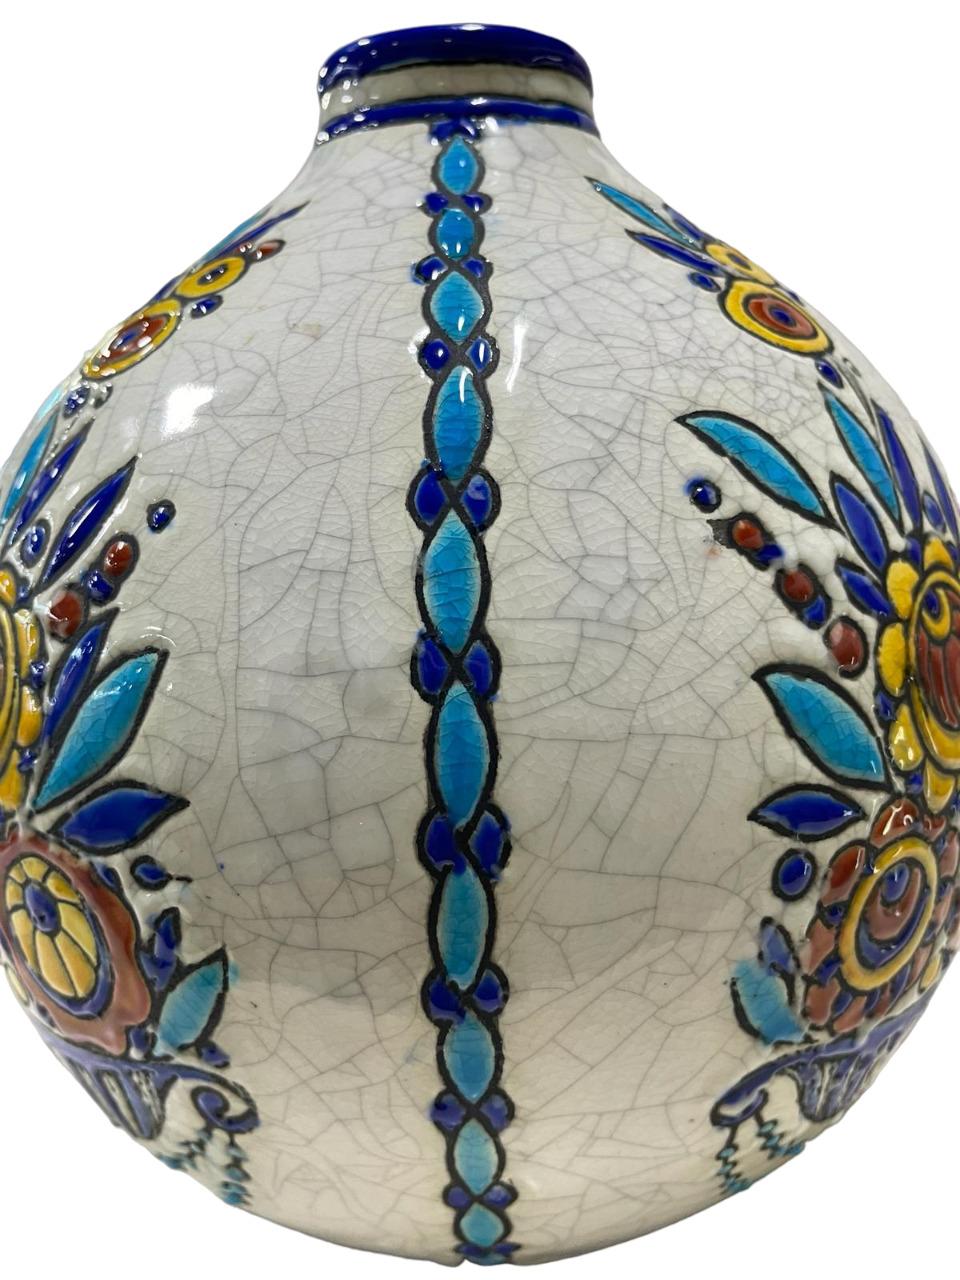 ART DECO CATTEAU Charles Egg Shape Vase D944 1925/1926 In Good Condition For Sale In Richmond Hill, ON